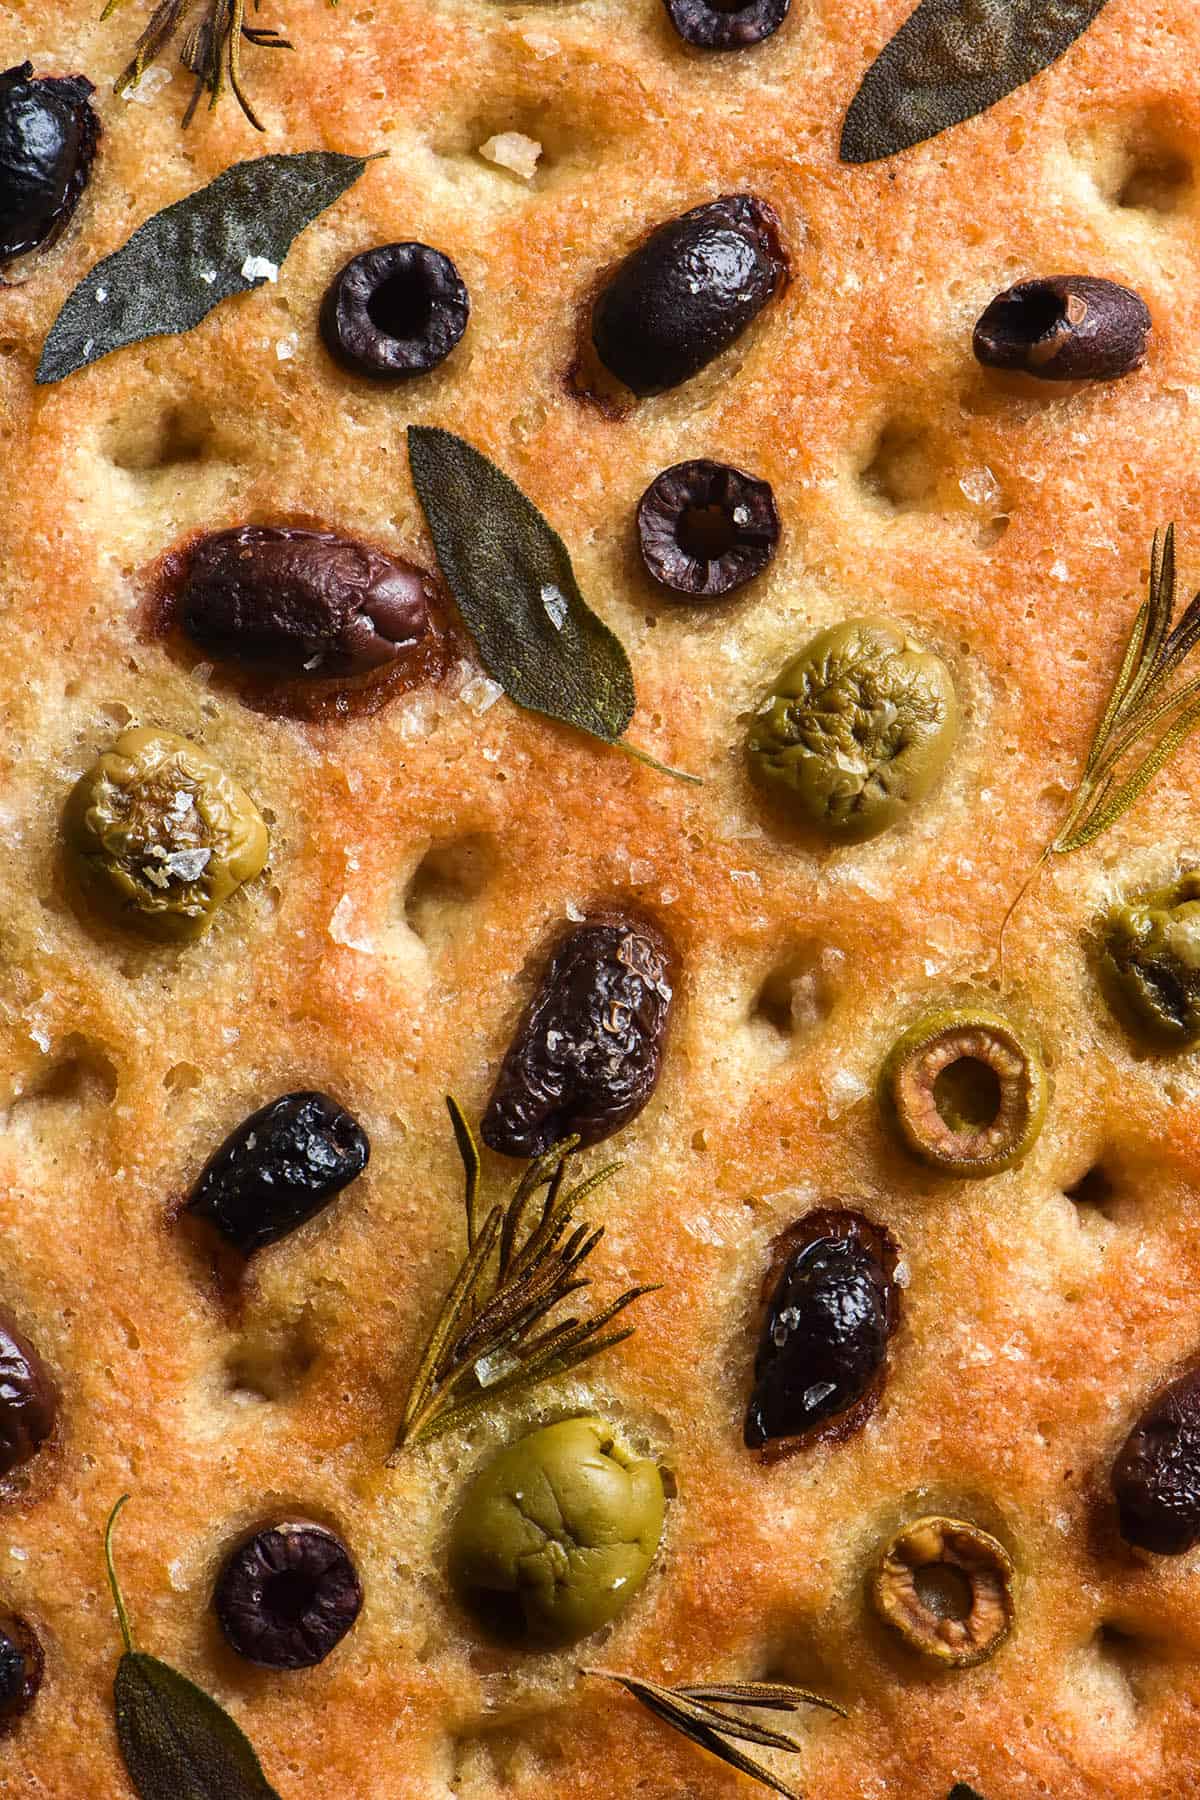 A close up aerial image of a gluten free focaccia that is golden brown and topped with green olives, kalamata olives, sage leaves, rosemary sprigs and flaky sea salt